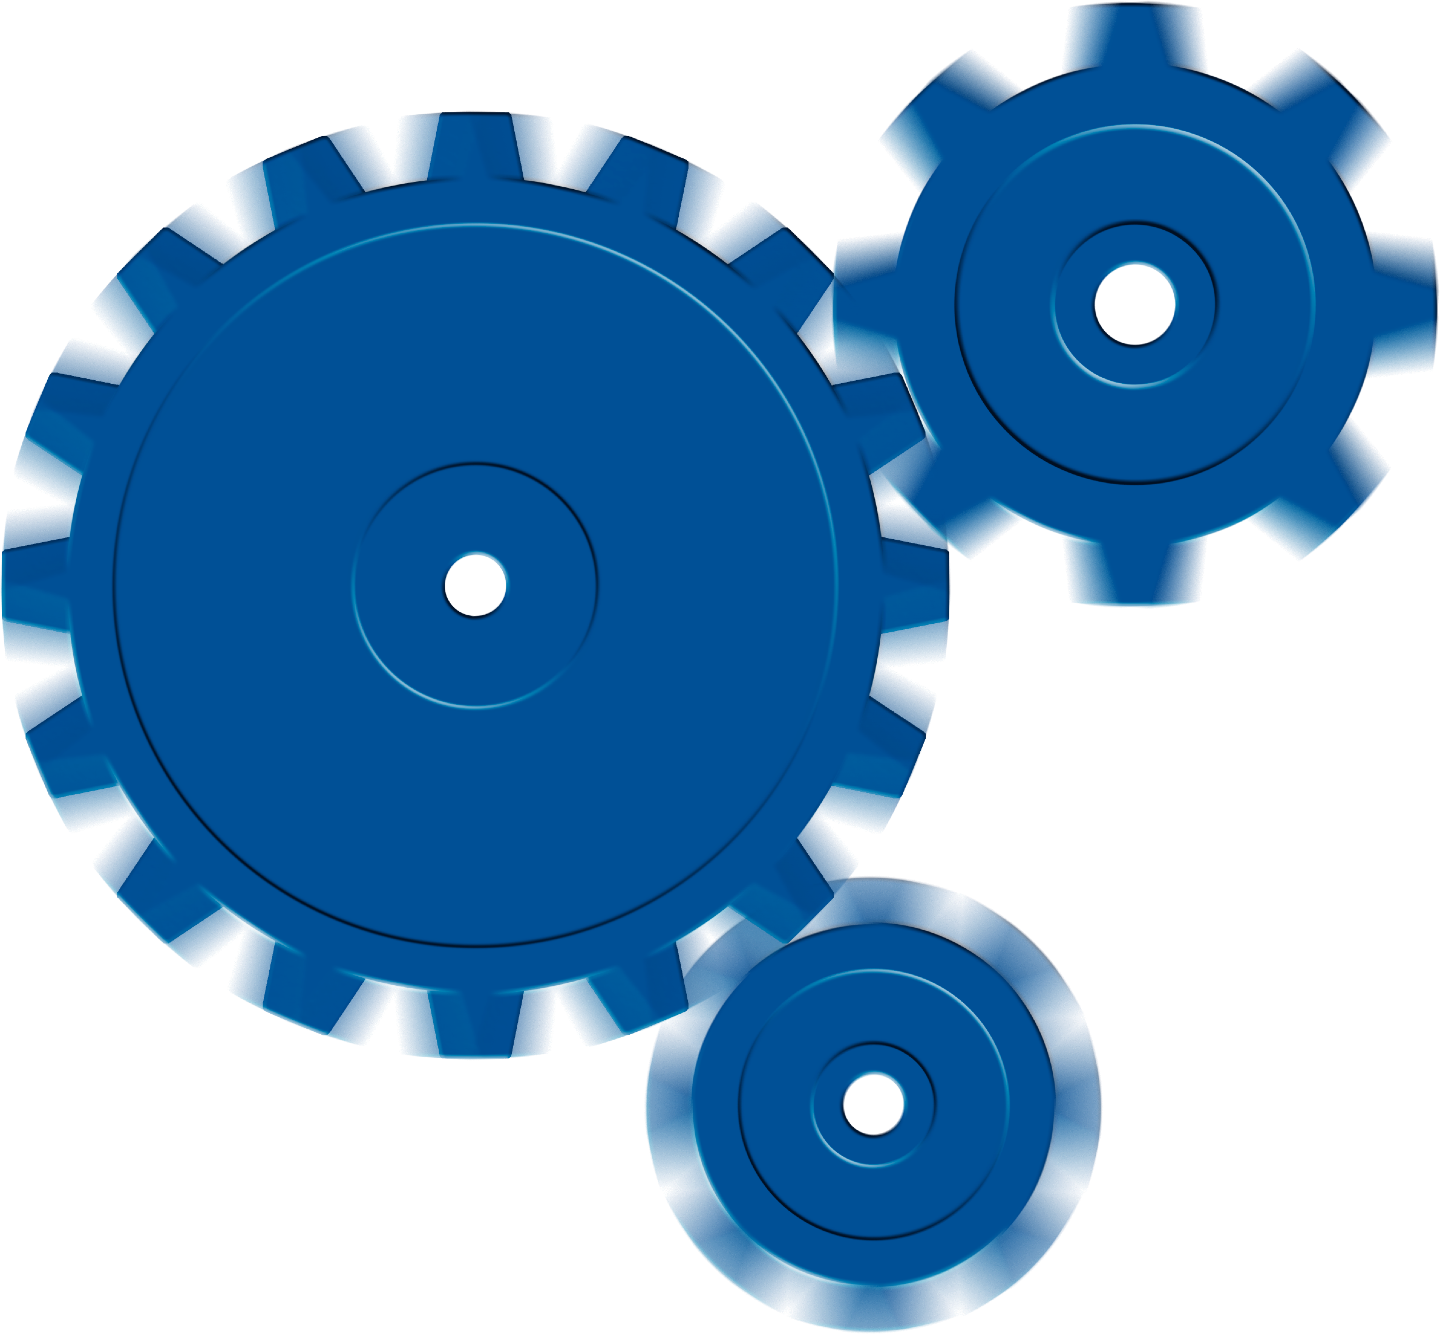 Photorealistic illustration of three interlocking blue cogwheels in motion, transparently superimposed over a colorful abstract painting of the same cogwheels.